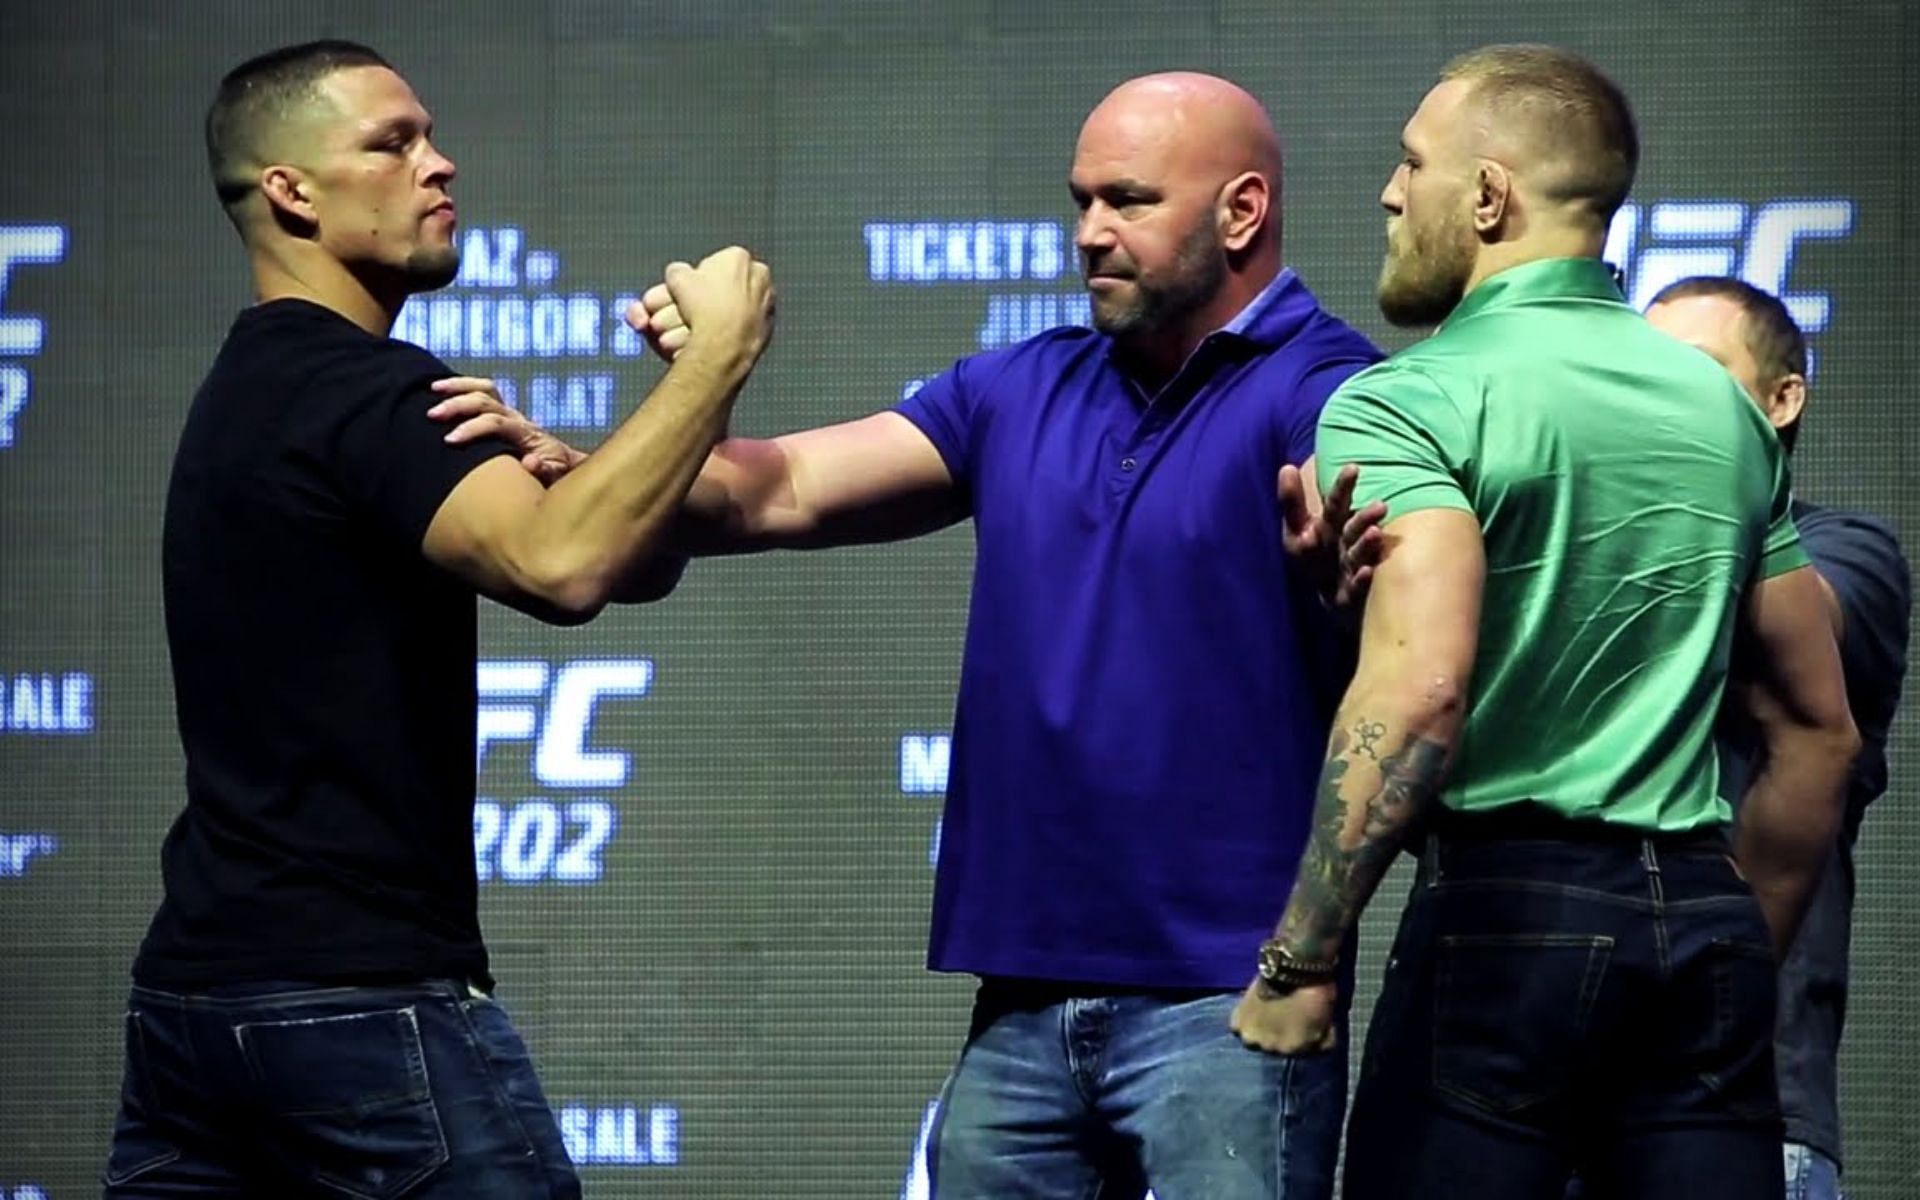 UFC fans would love to see the trilogy between Nate Diaz and Conor McGregor completed in 2022